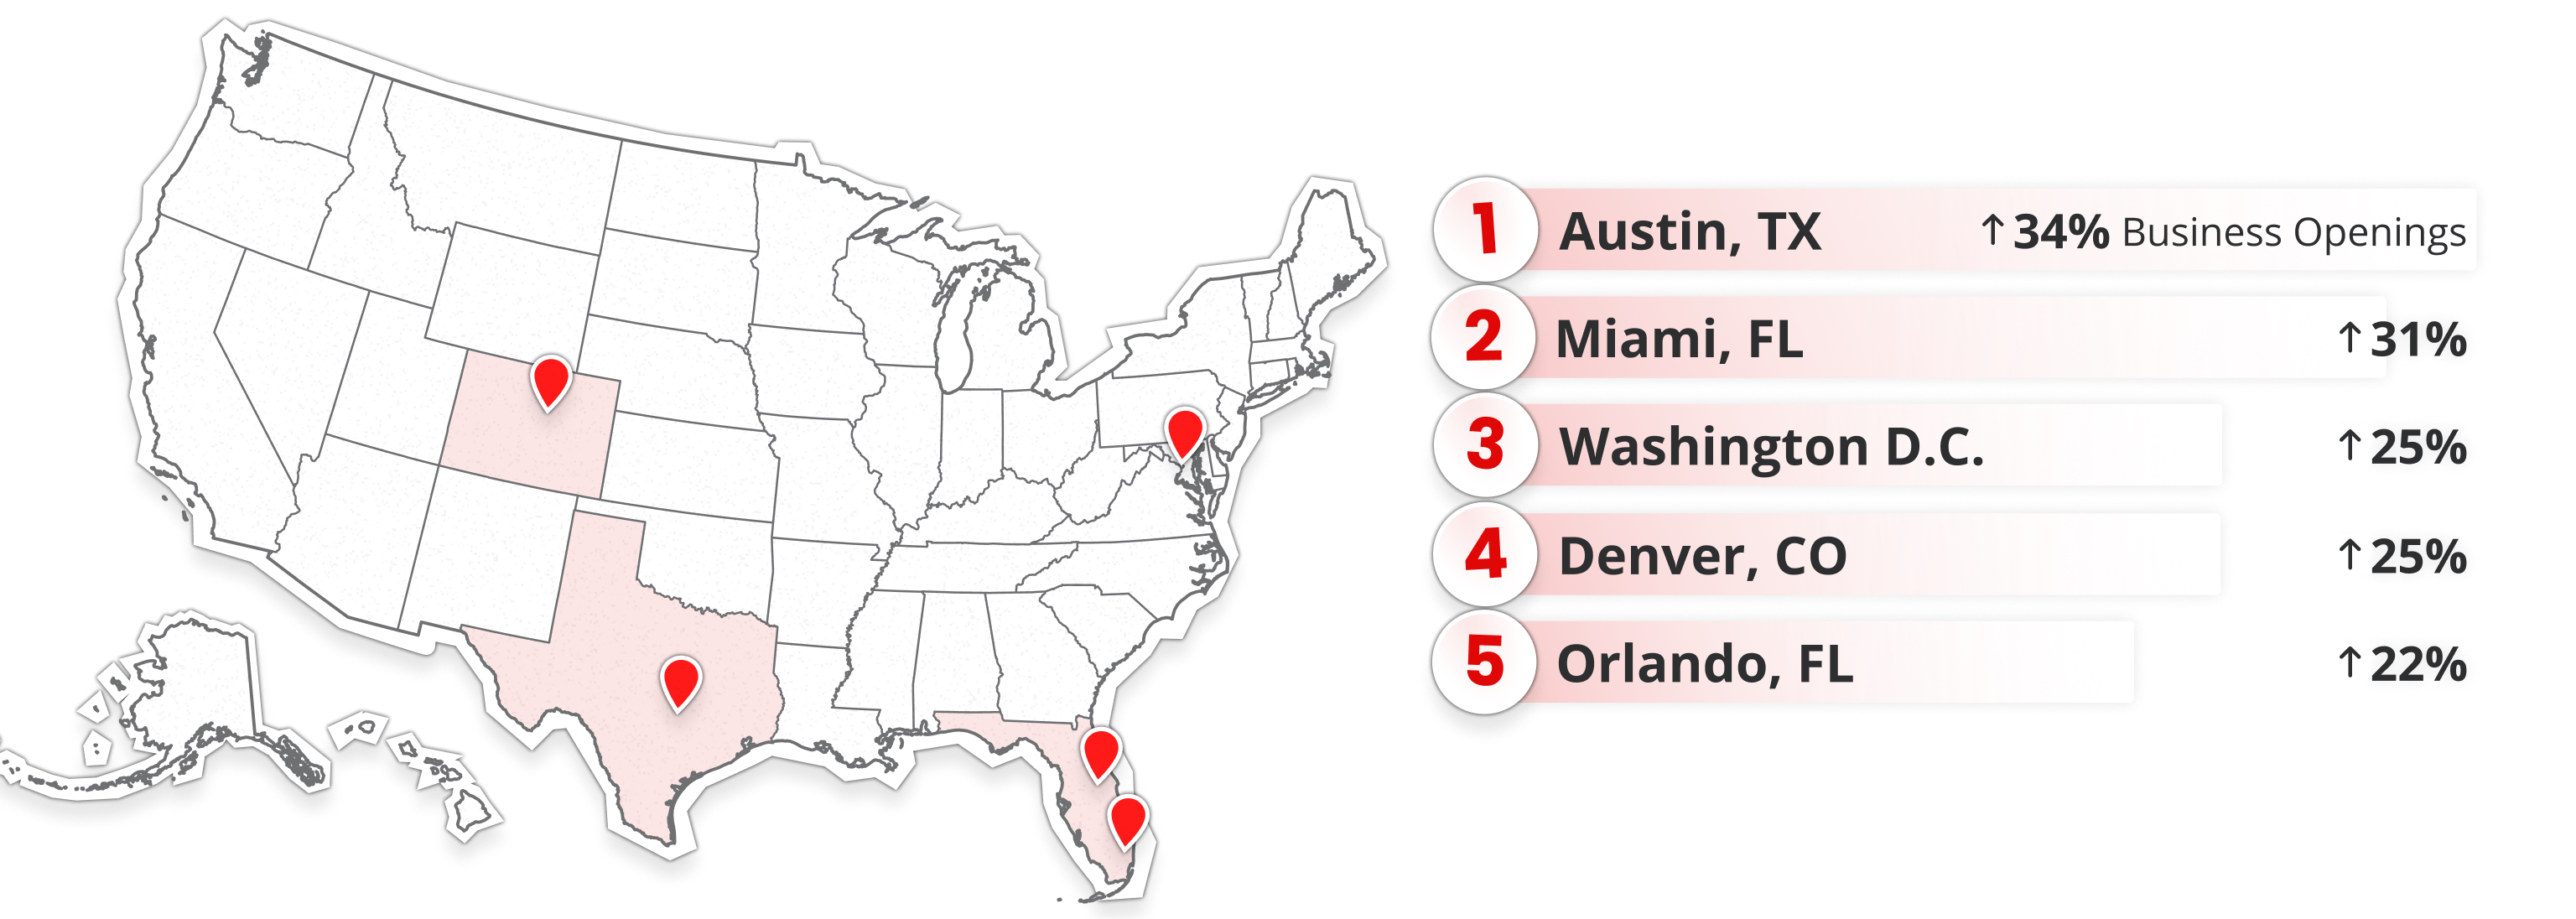 The top metros for growth in women-owned businesses were Austin, TX, Miami, FL, Washington, D.C., Denver, CO, and Orlando, FL.